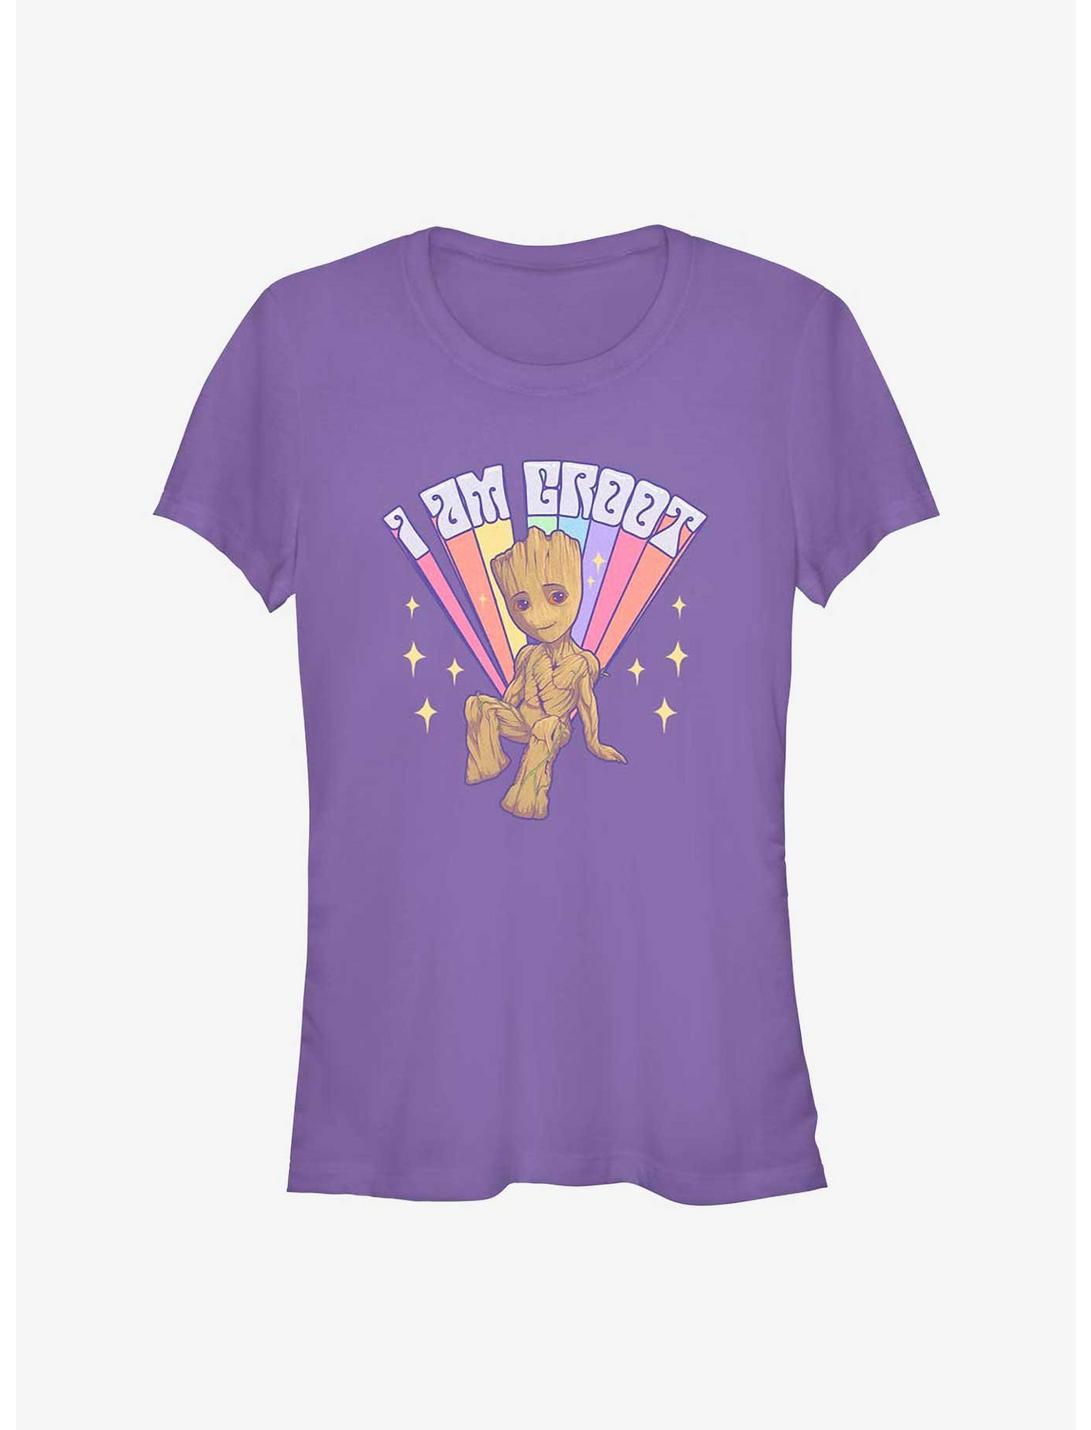 Marvel Guardians of the Galaxy I Am Groot Girls T-Shirt, PURPLE, hi-res